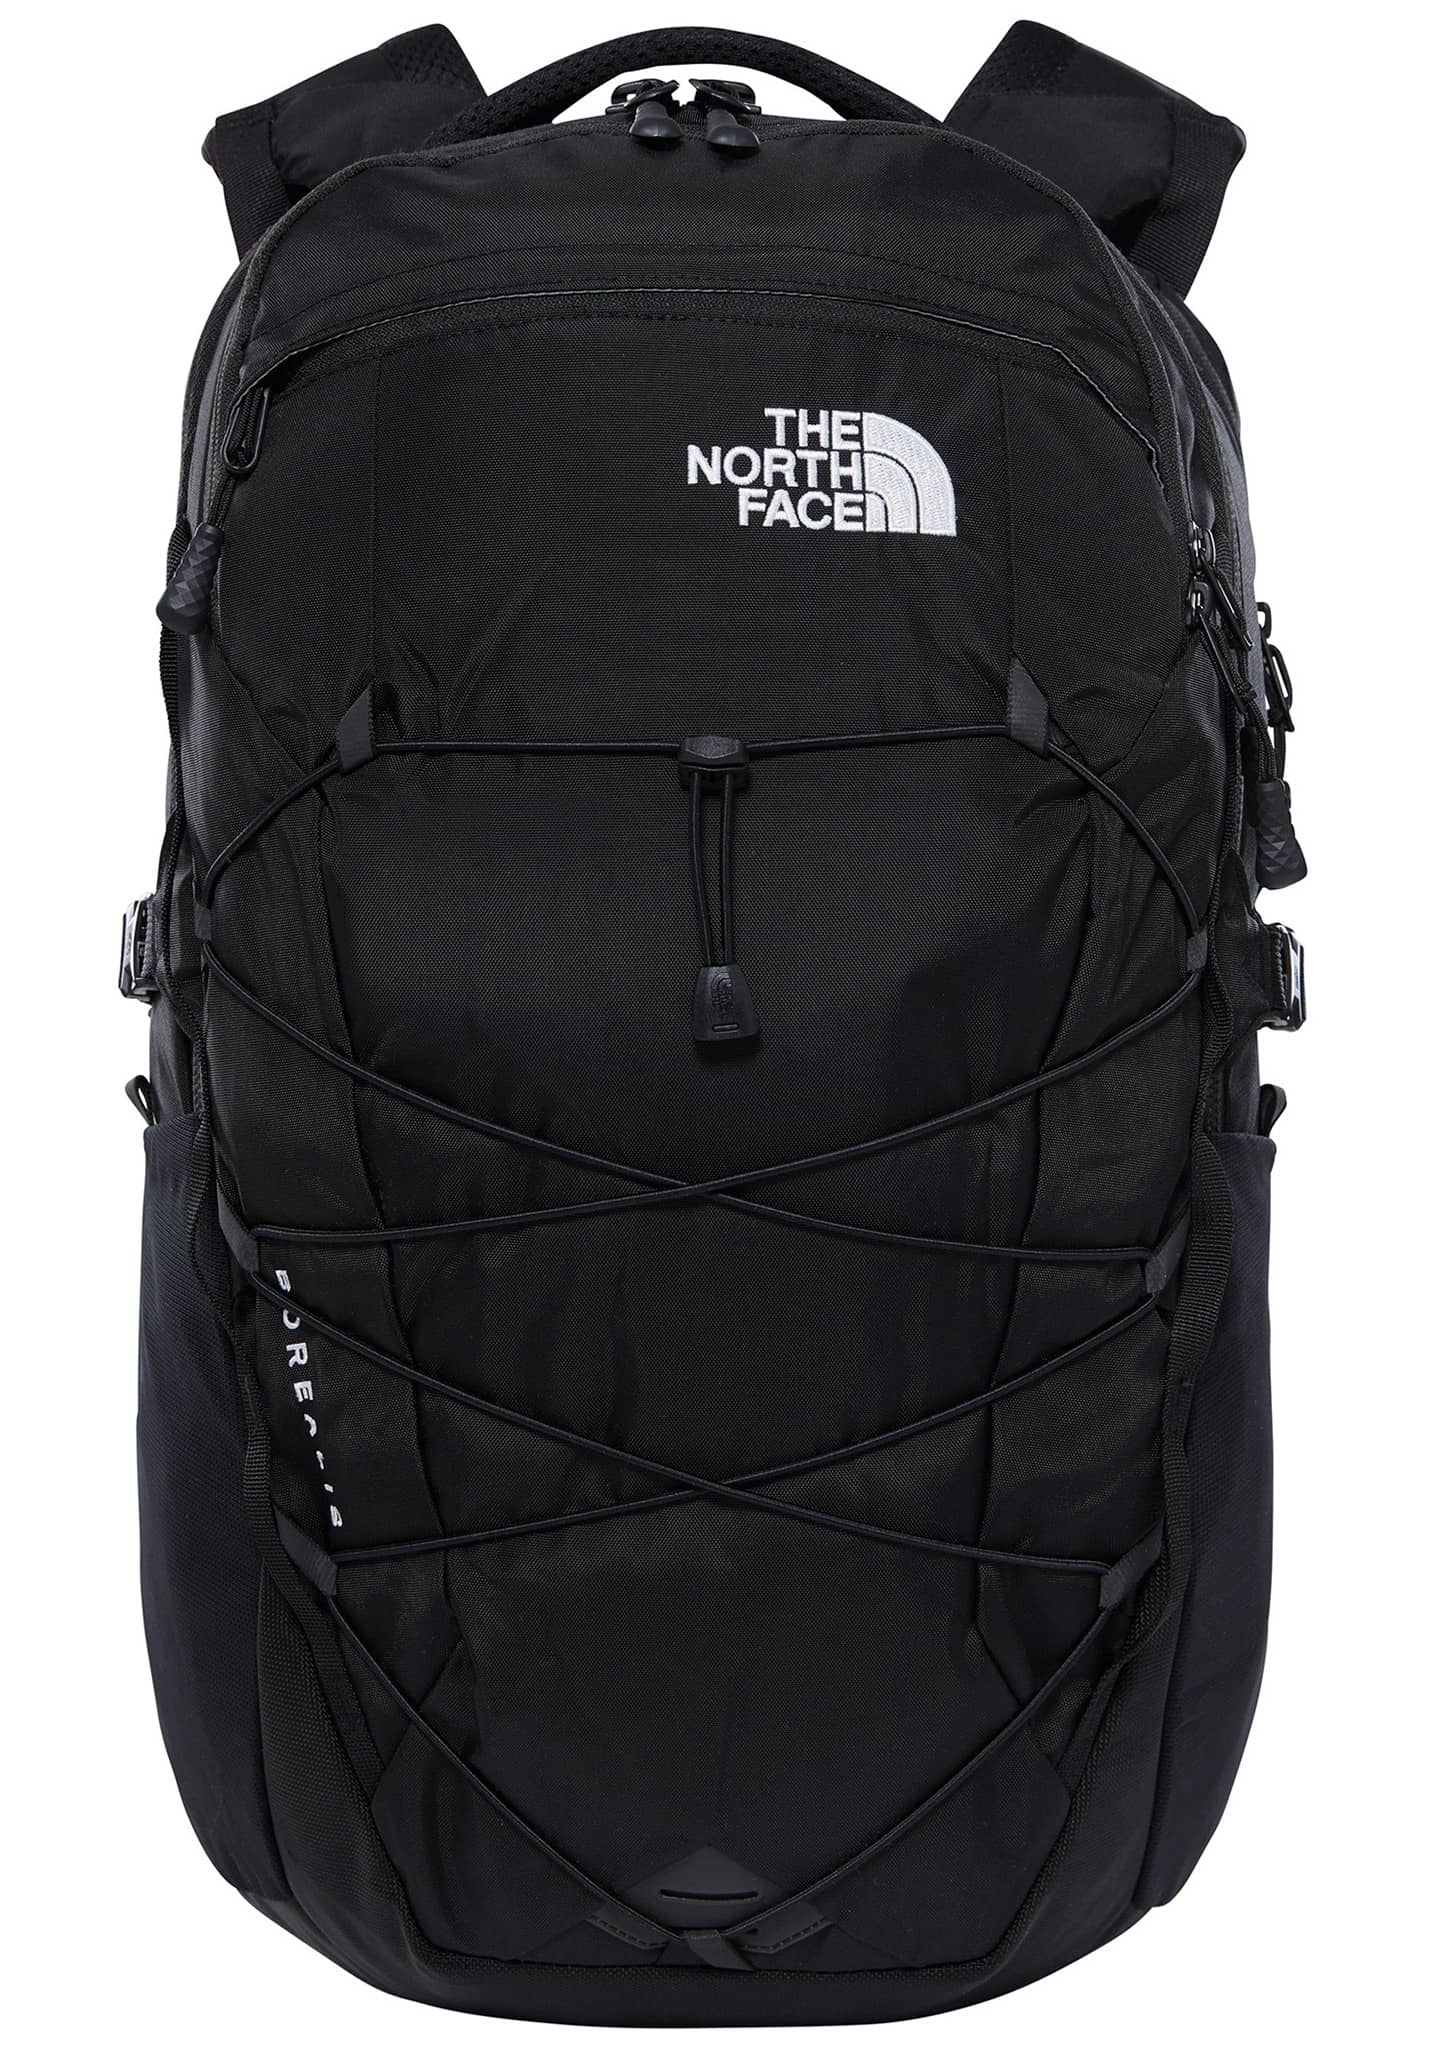 The North Face Borealis 28L Rucksack tnf schwarz One Size